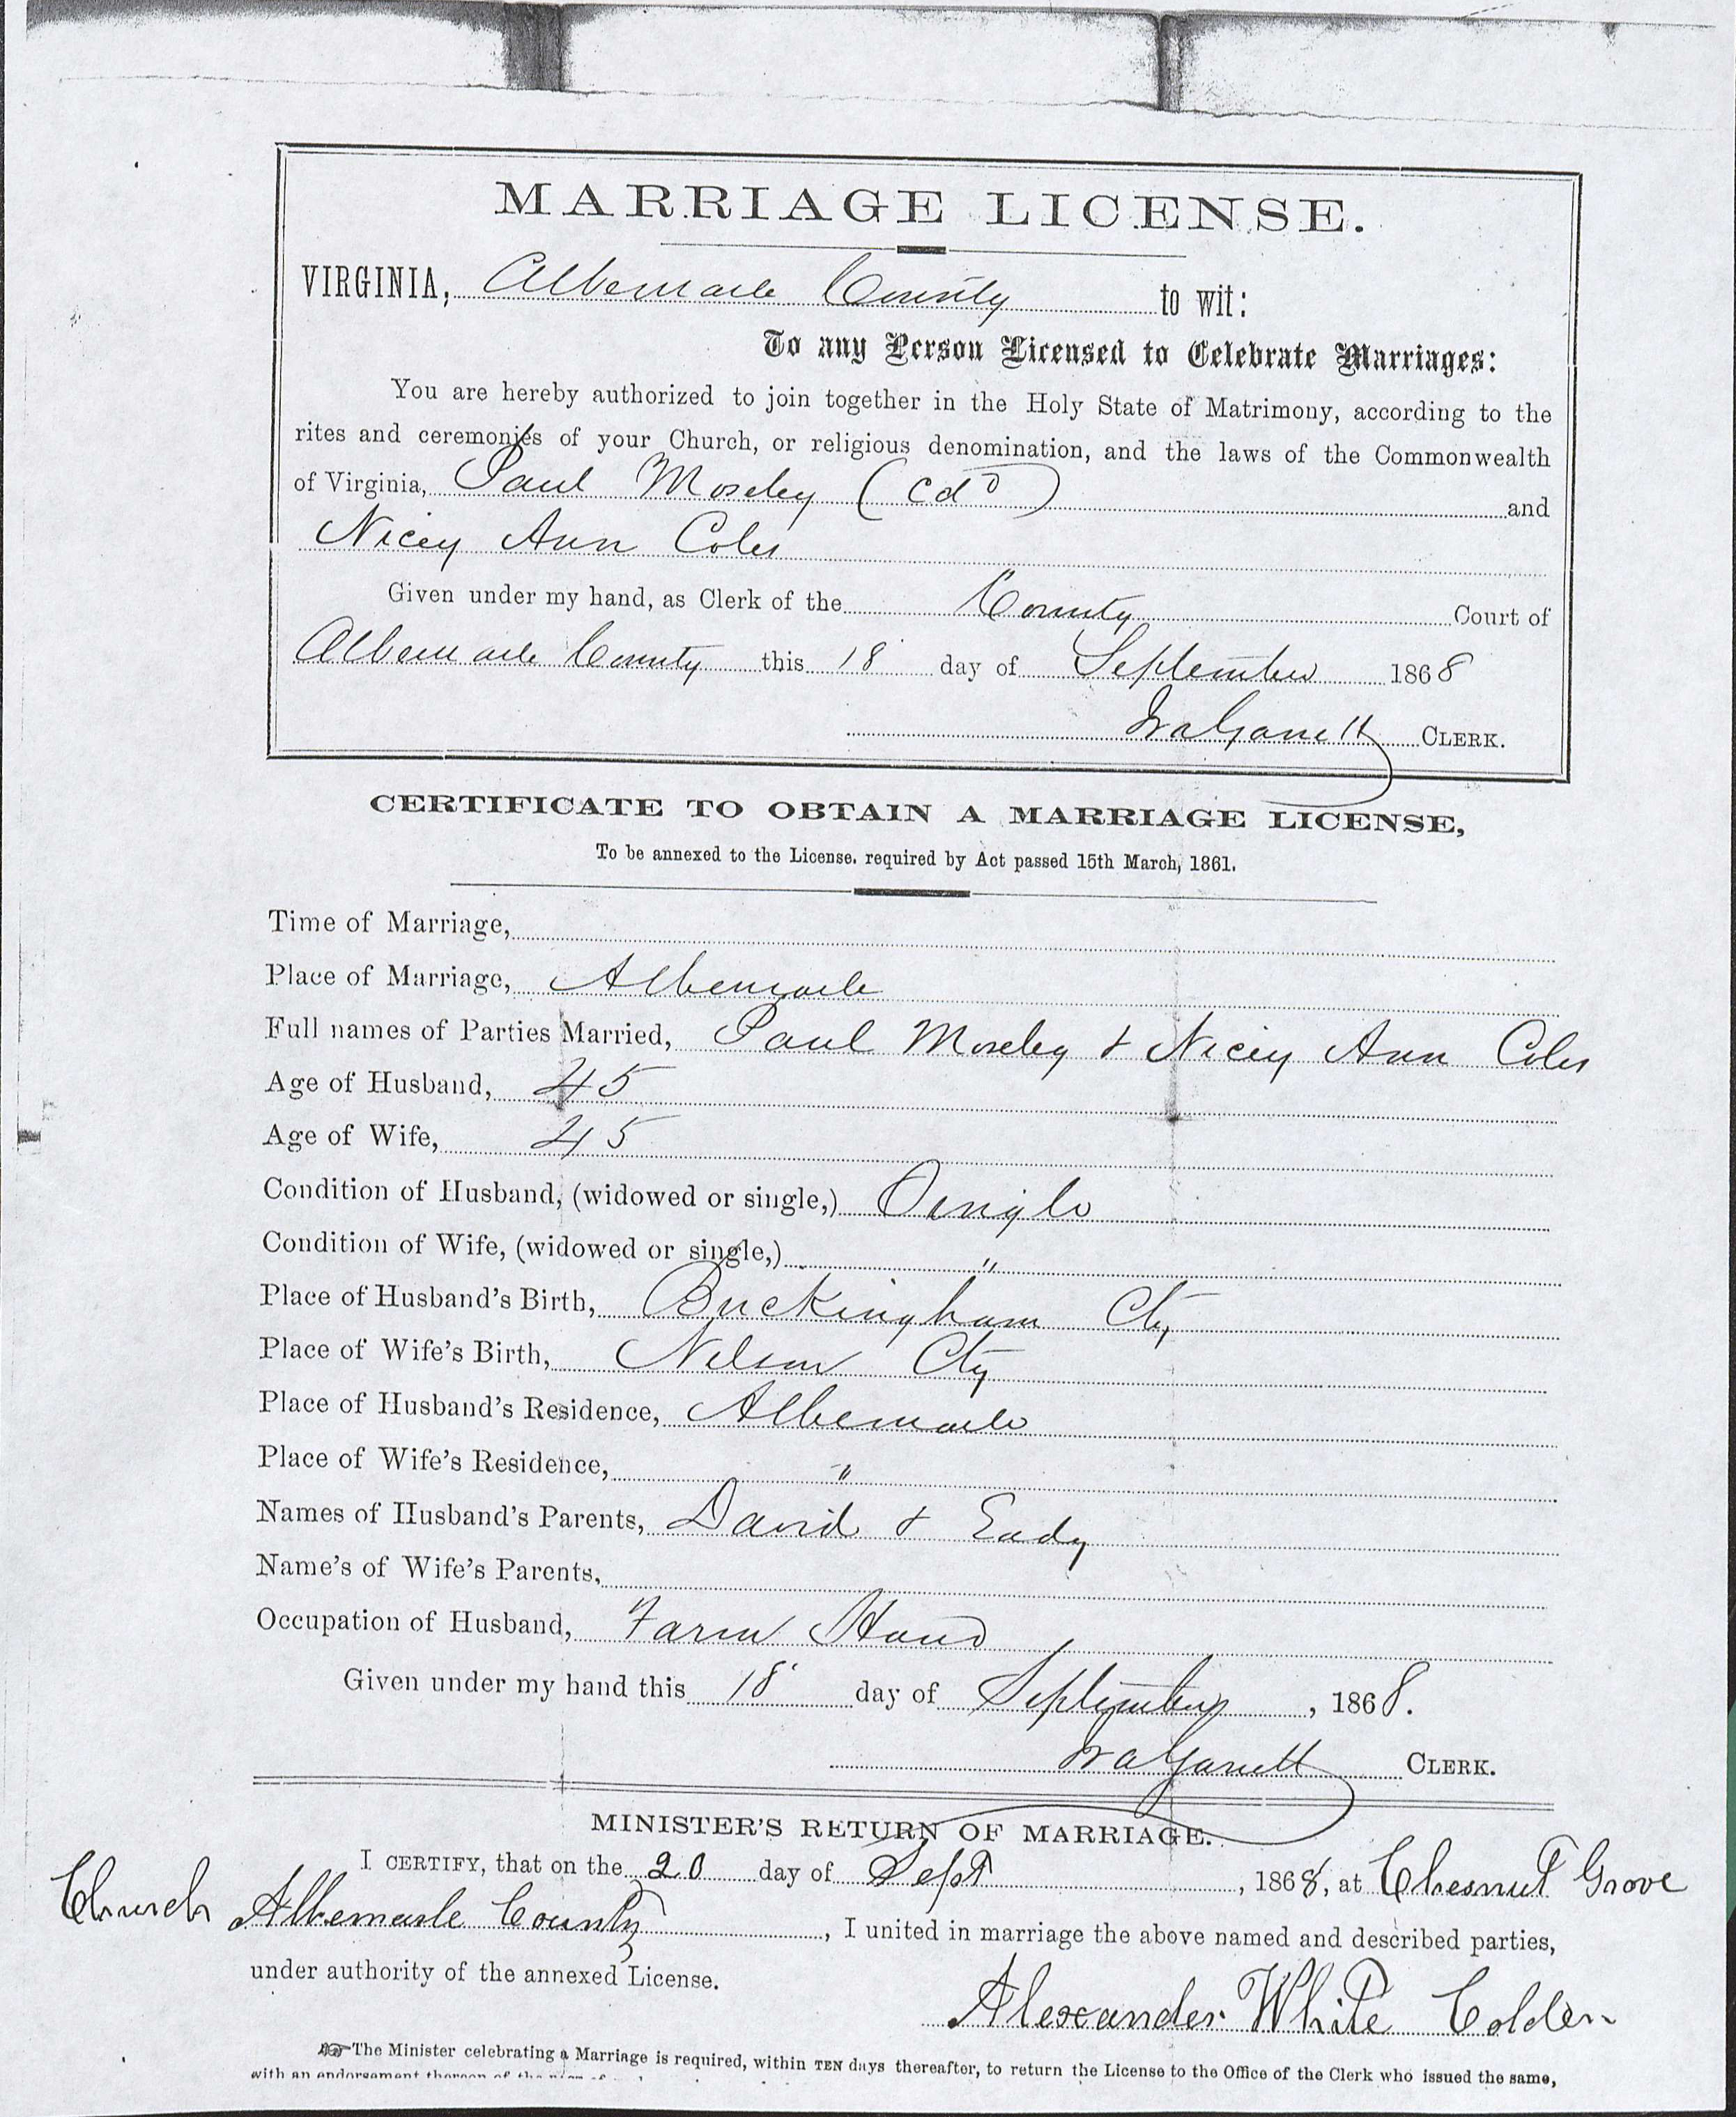 Marriage license of Nicey Ann Coles and Paul Moseley, September 18, 1868. Courtesy of the Albemarle County Courthouse, Charlottesville, Virginia, 22902 (Image by Regina Rush)